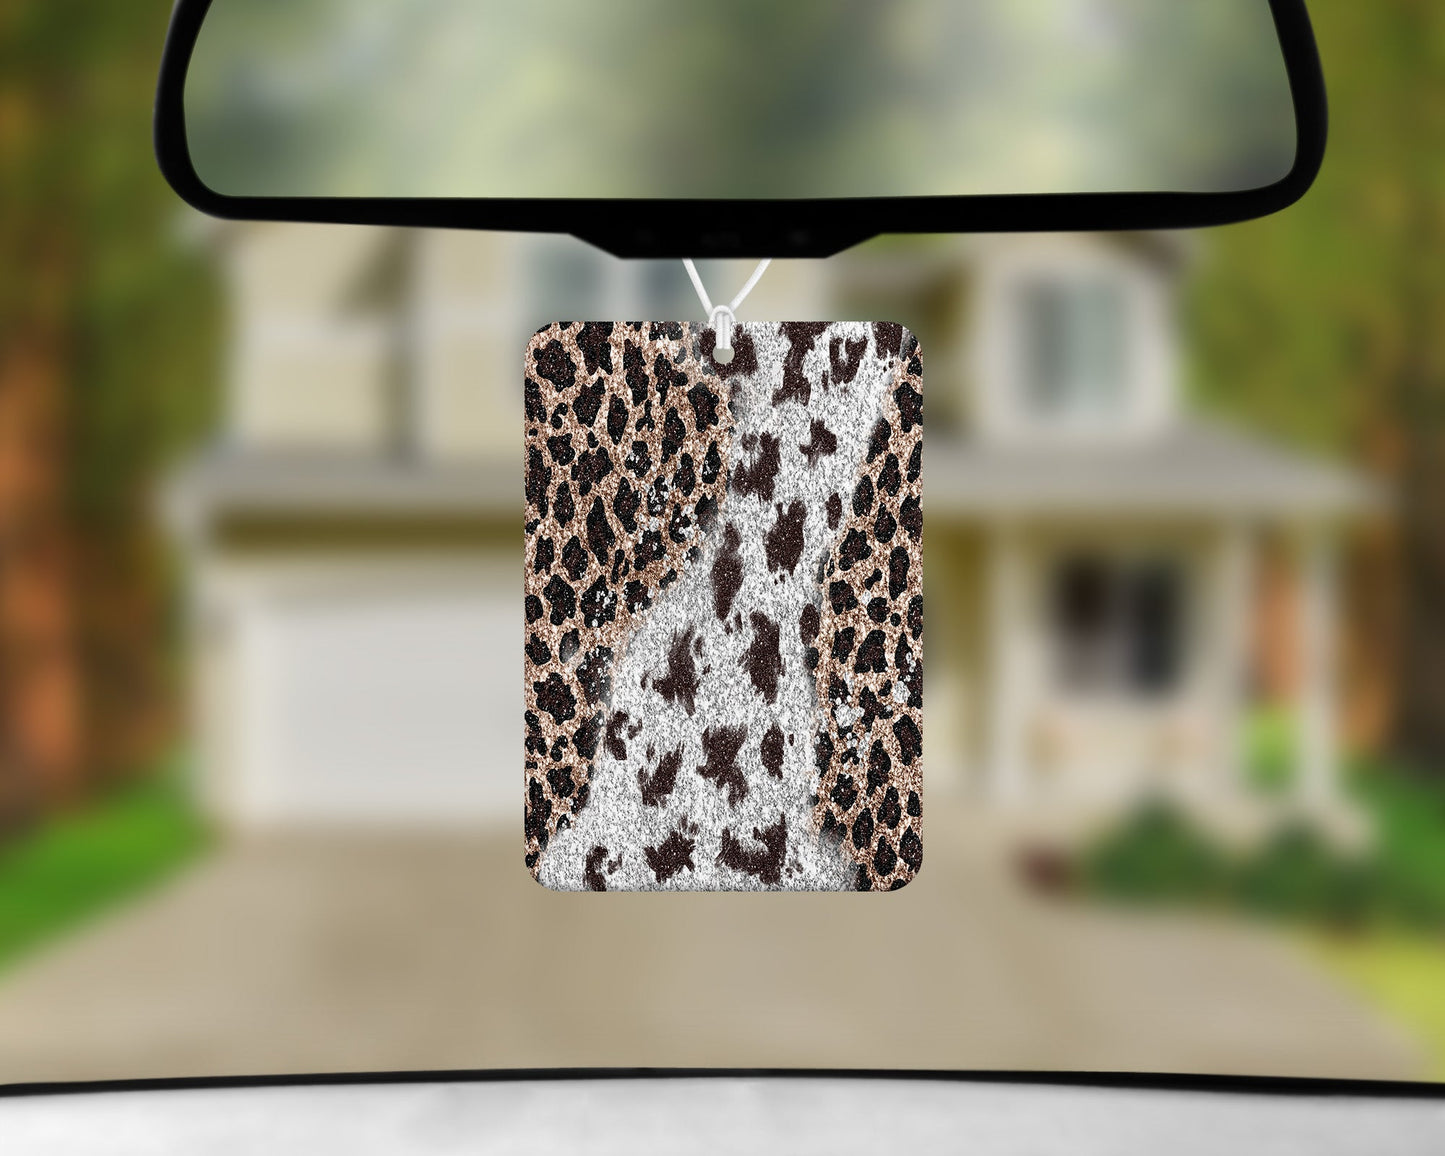 Leopard Print Cow Print|Freshie|Includes Scent Bottle - Vehicle Air Freshener